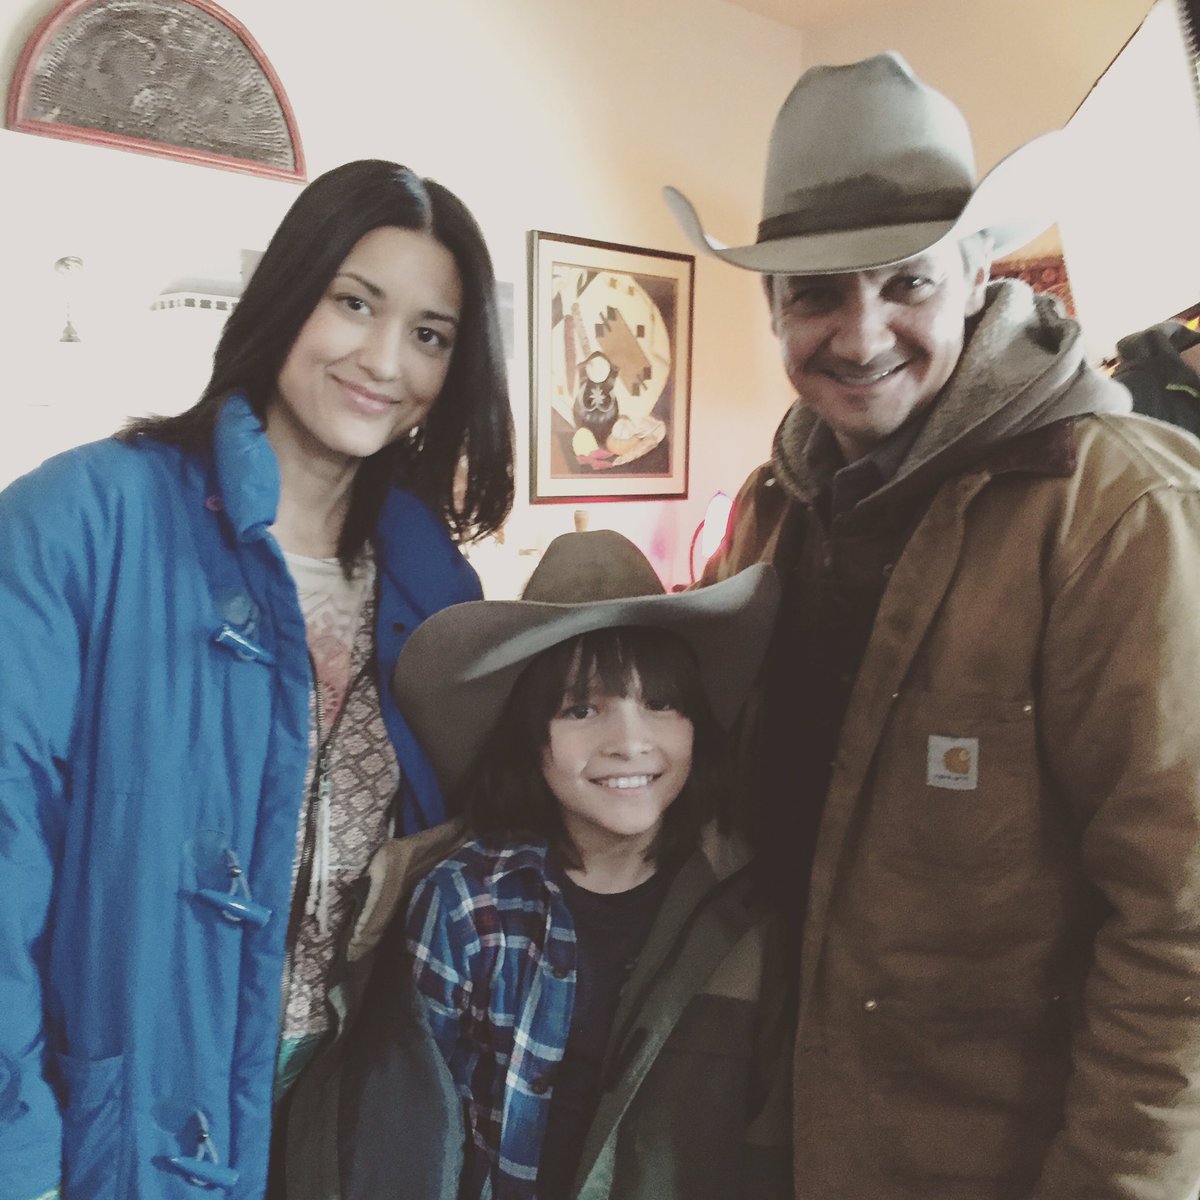 RT @TheTeoBriones: Back in Utah for #windrivermovie. With 